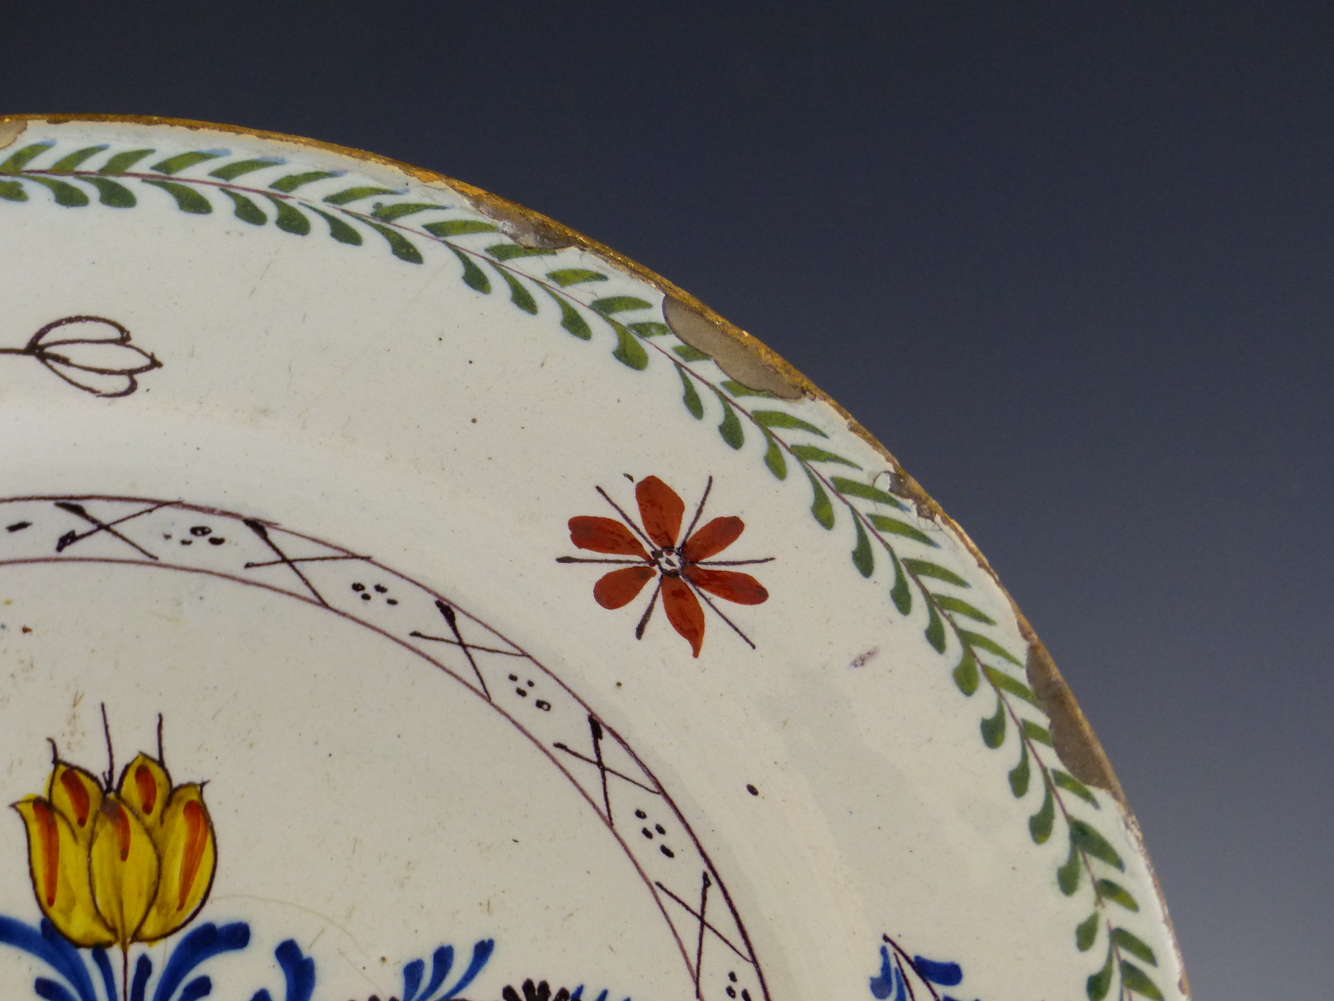 A PAIR OF MID 18th C. ENGLISH POLYCHROME DELFT DISHES PAINTED WITH CENTRAL SPRAYS OF FLOWERS - Image 10 of 20